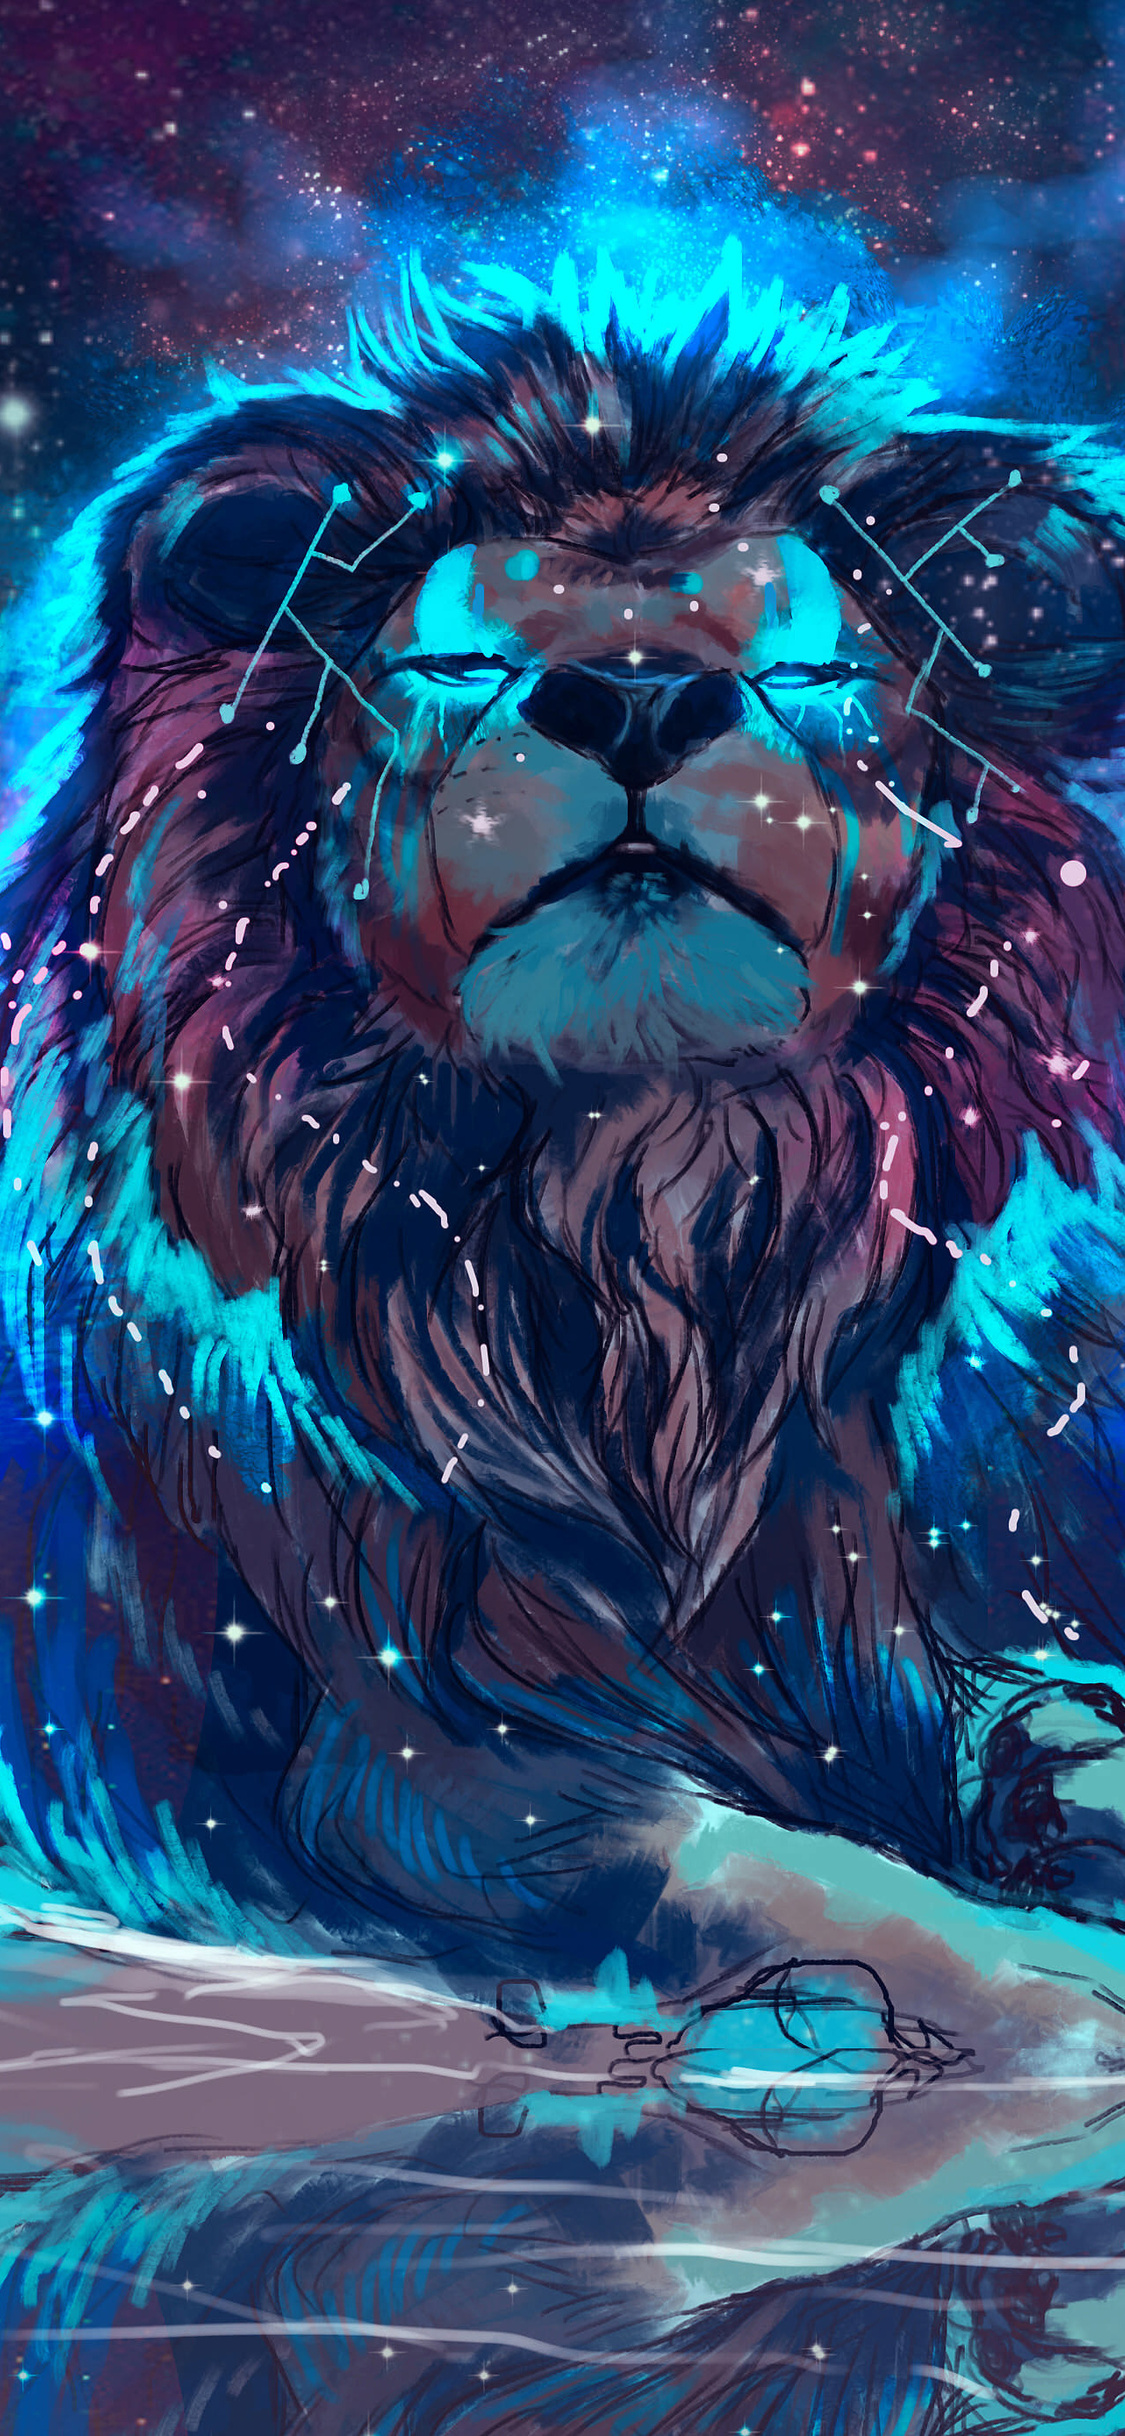 Lion Artistic Colorful Wallpapers